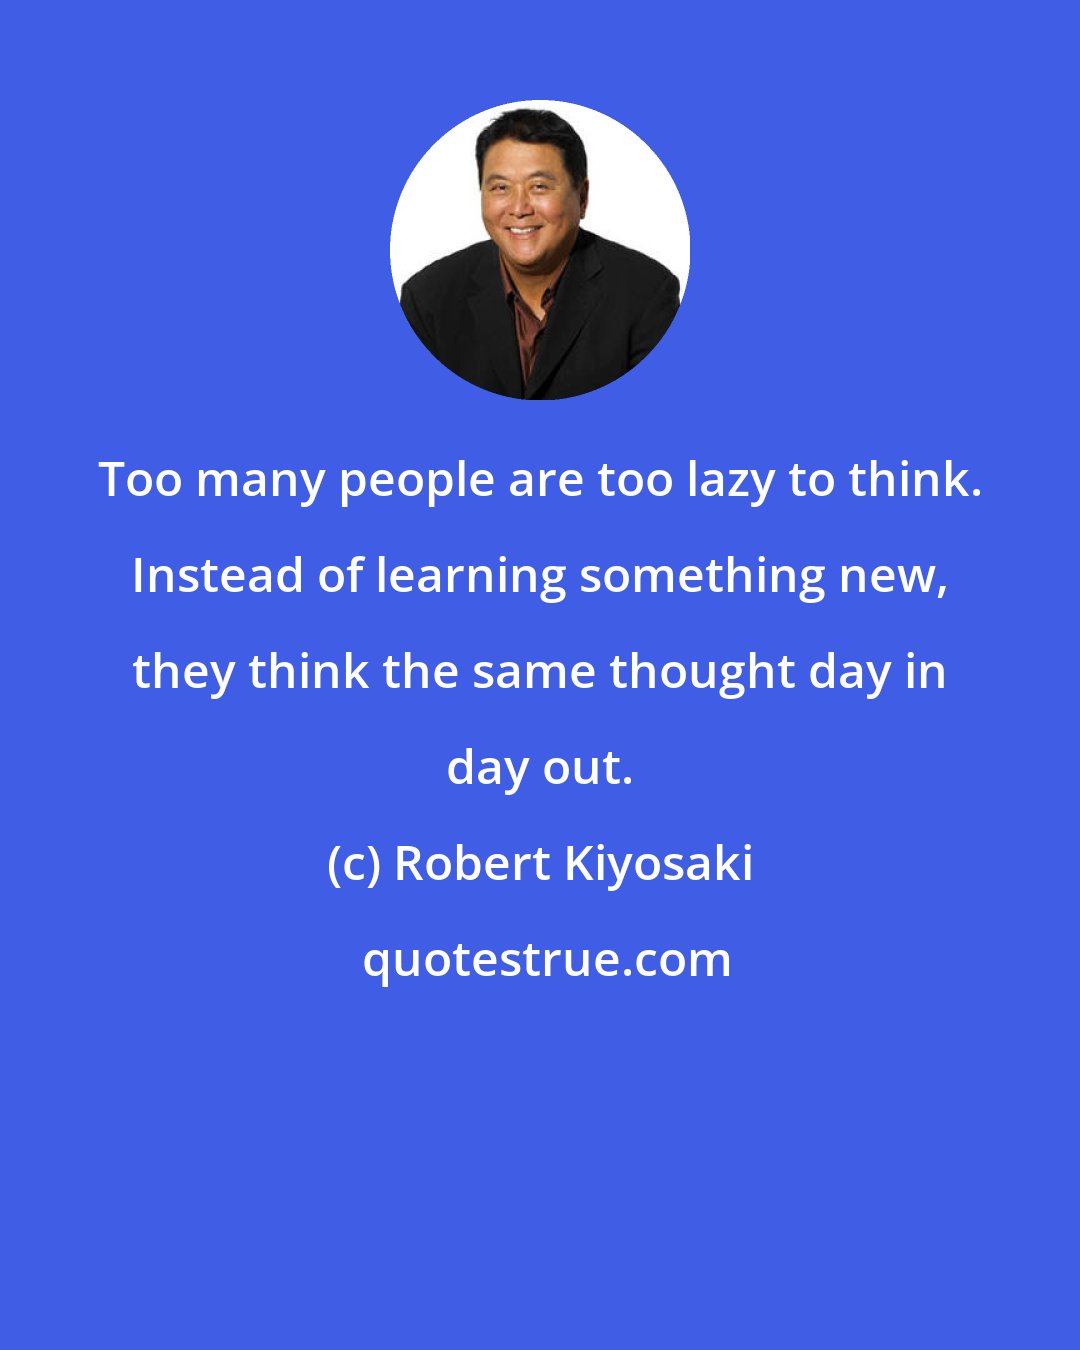 Robert Kiyosaki: Too many people are too lazy to think. Instead of learning something new, they think the same thought day in day out.